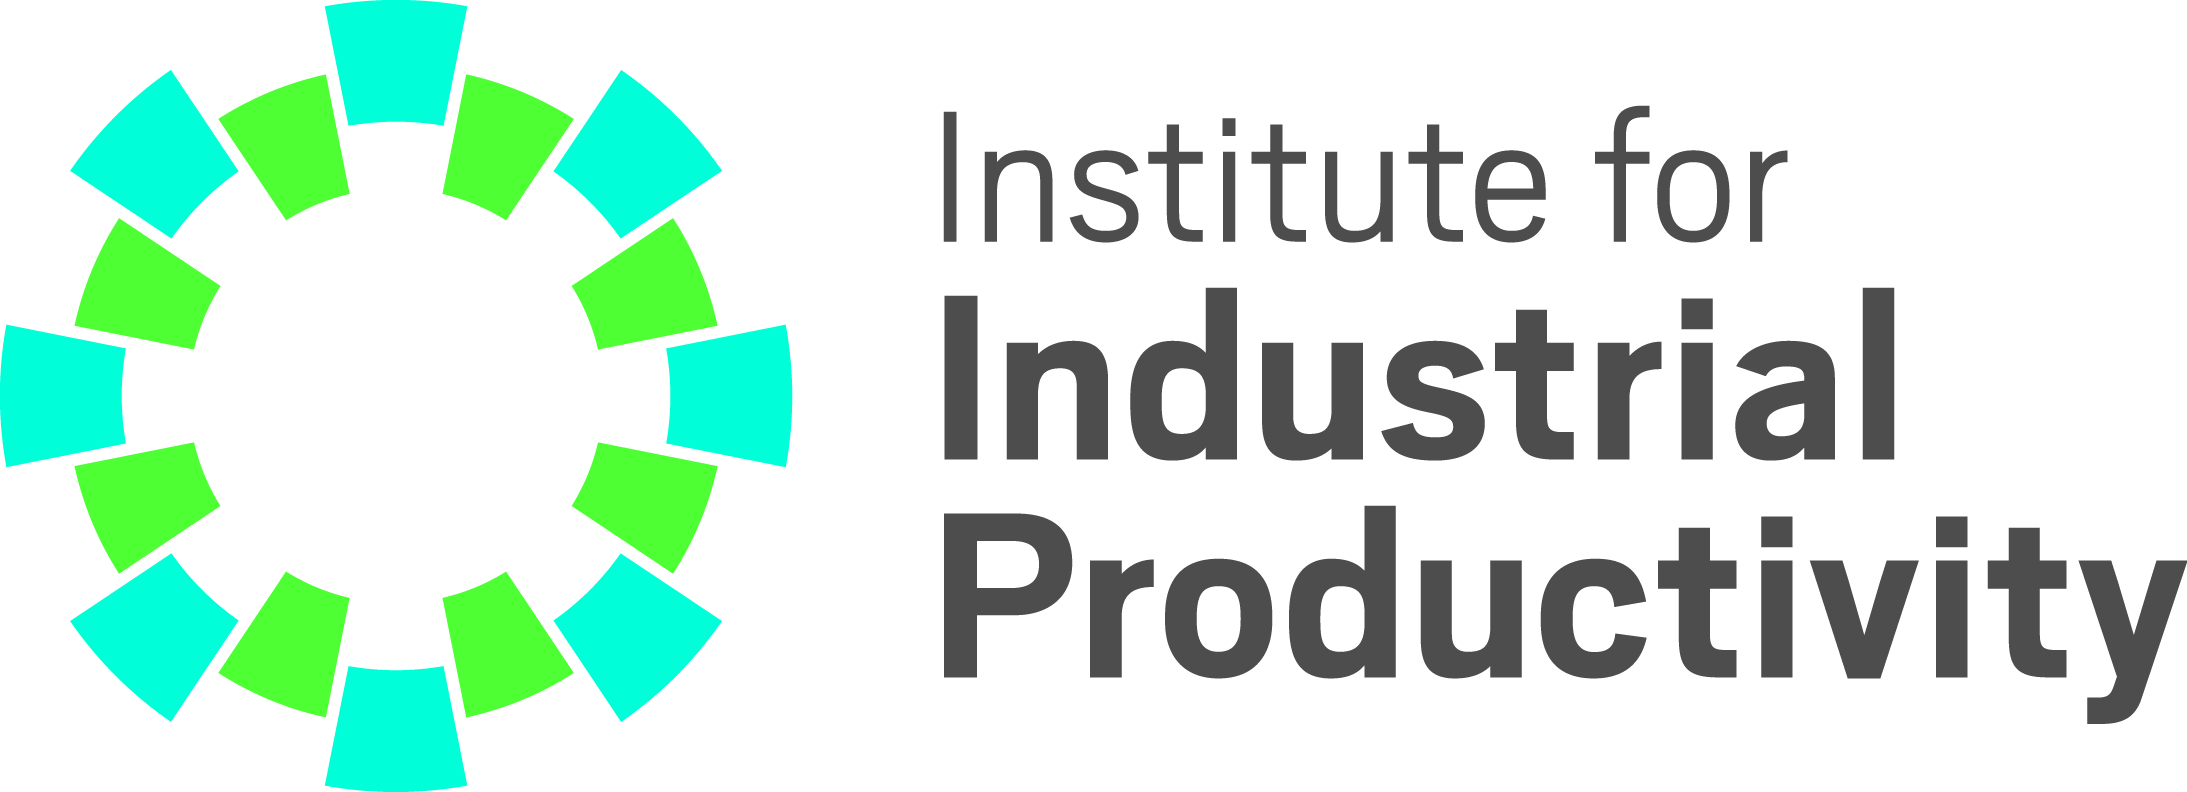 Institute for Industrial Productivity logo